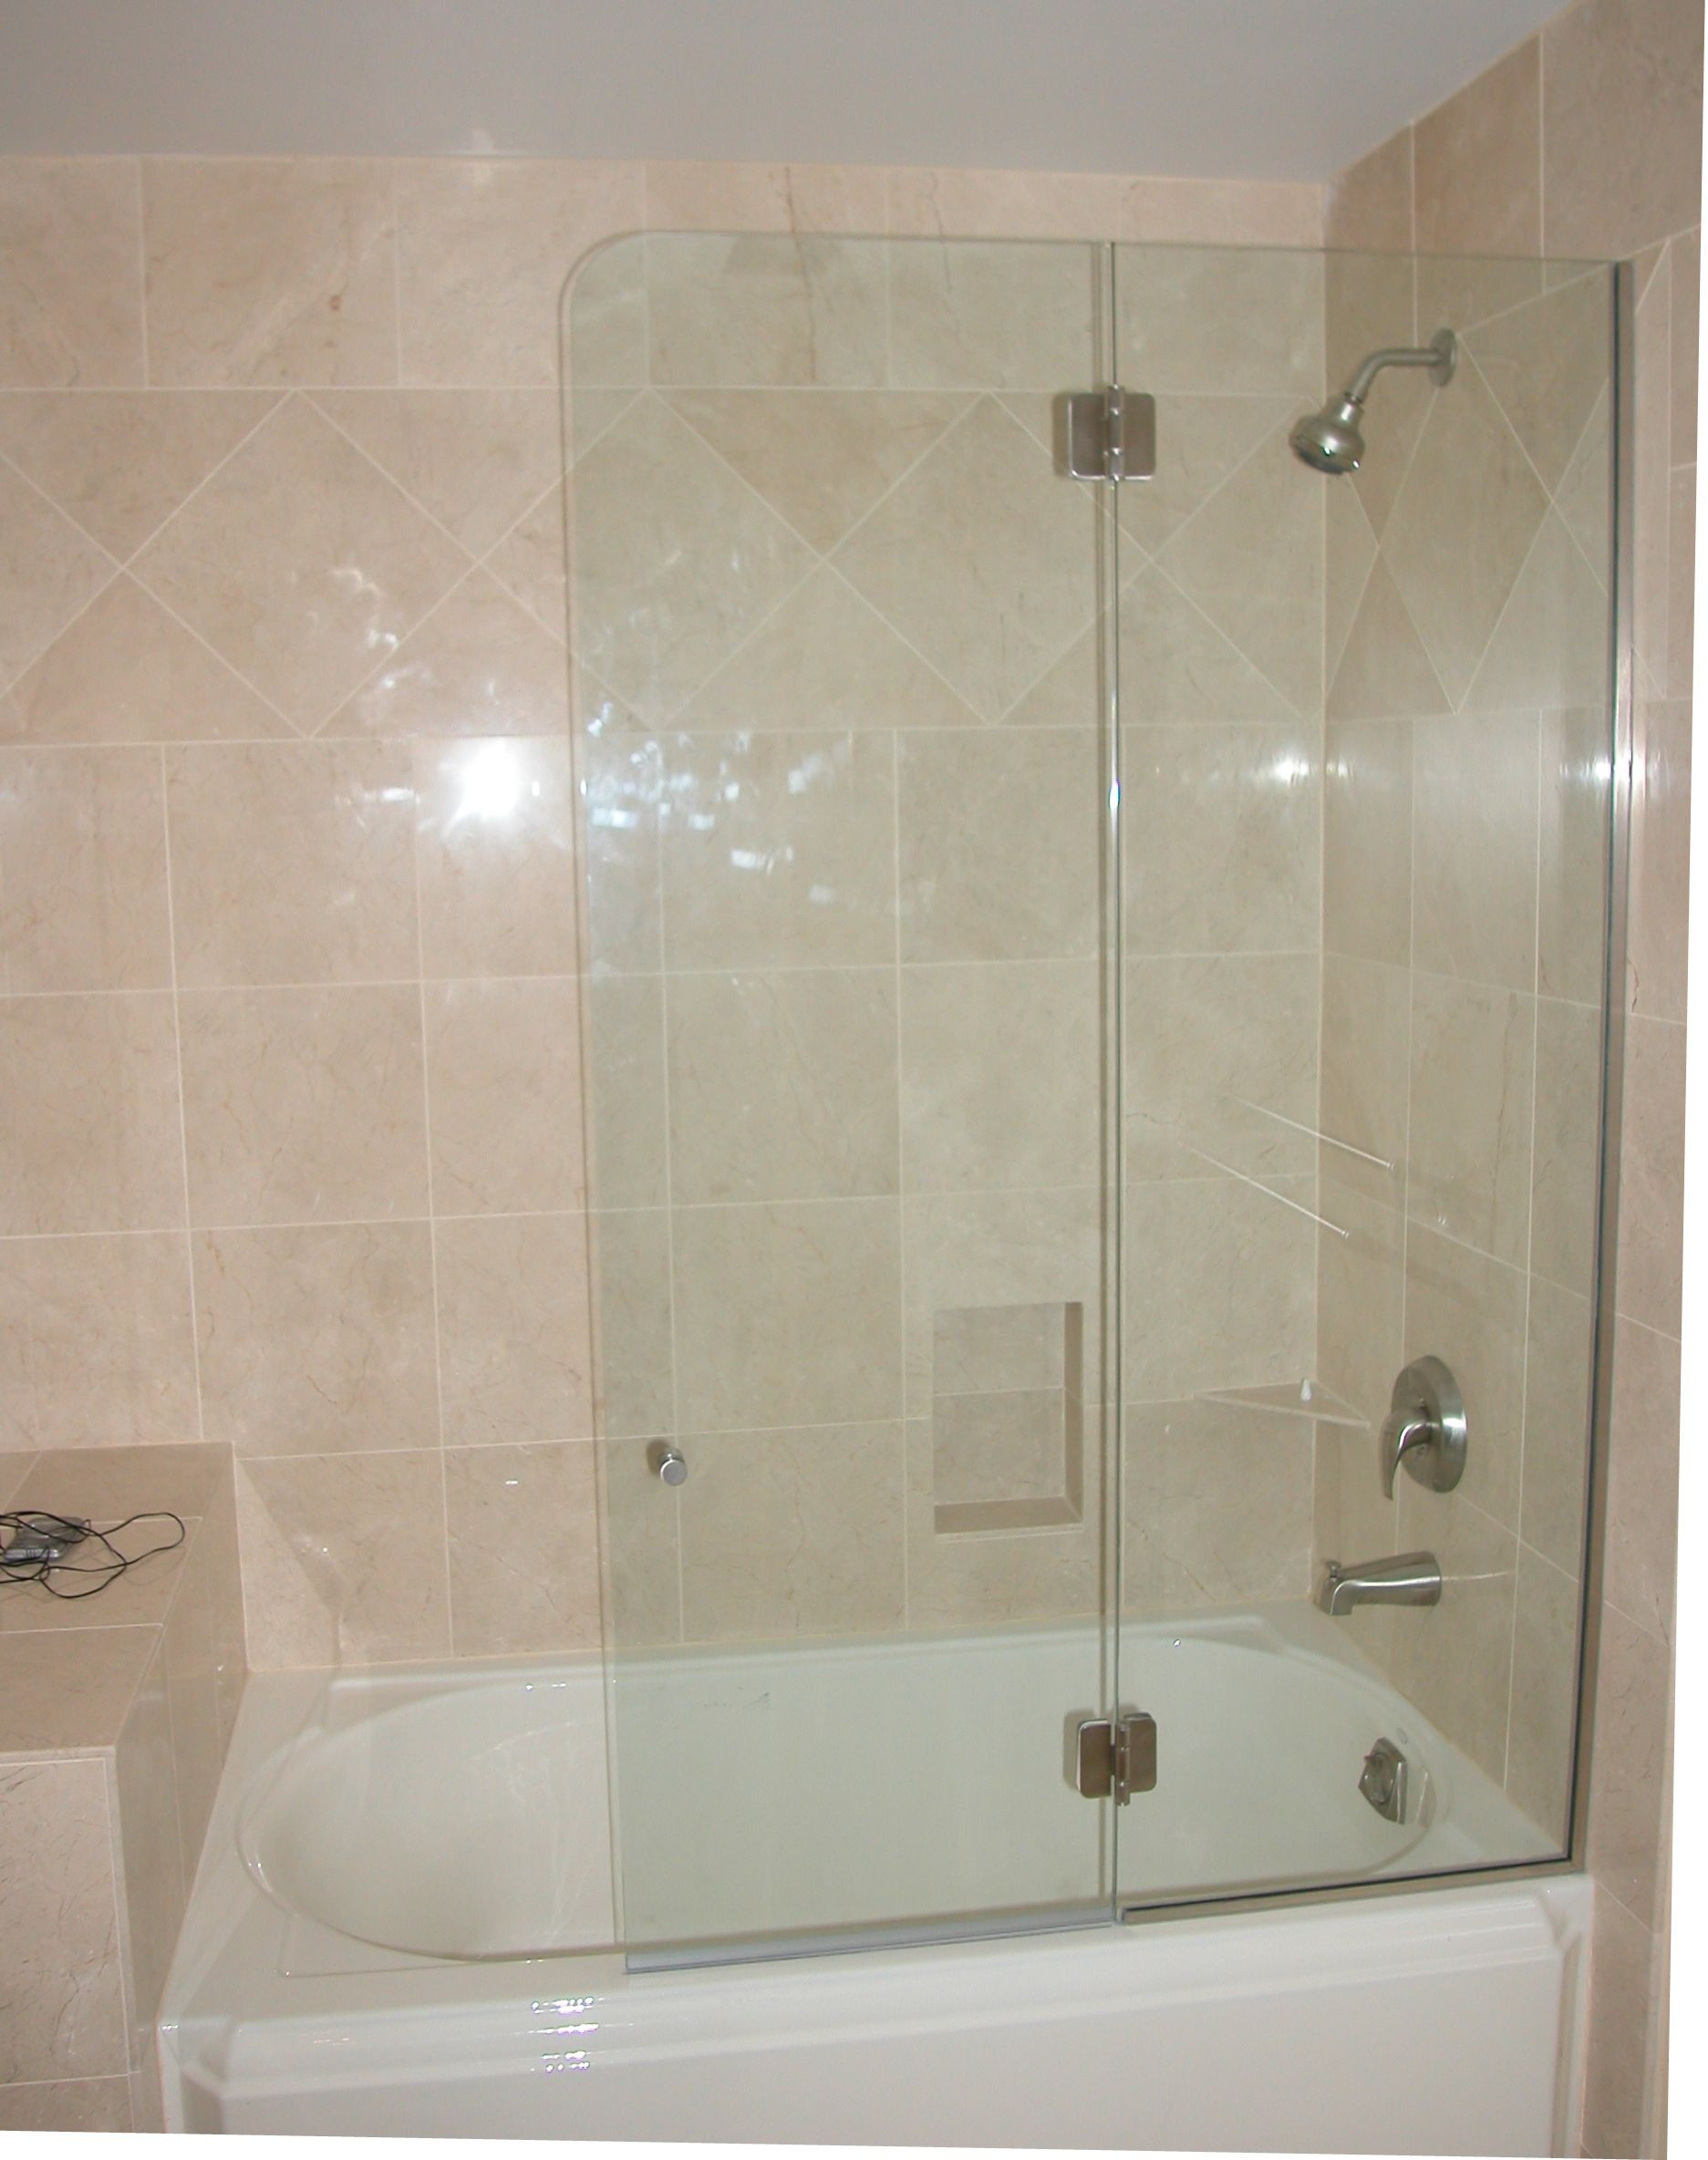 Bathroom Glass Wall
 Shower Glass Panel Ideas for a Small Bathroom at Your